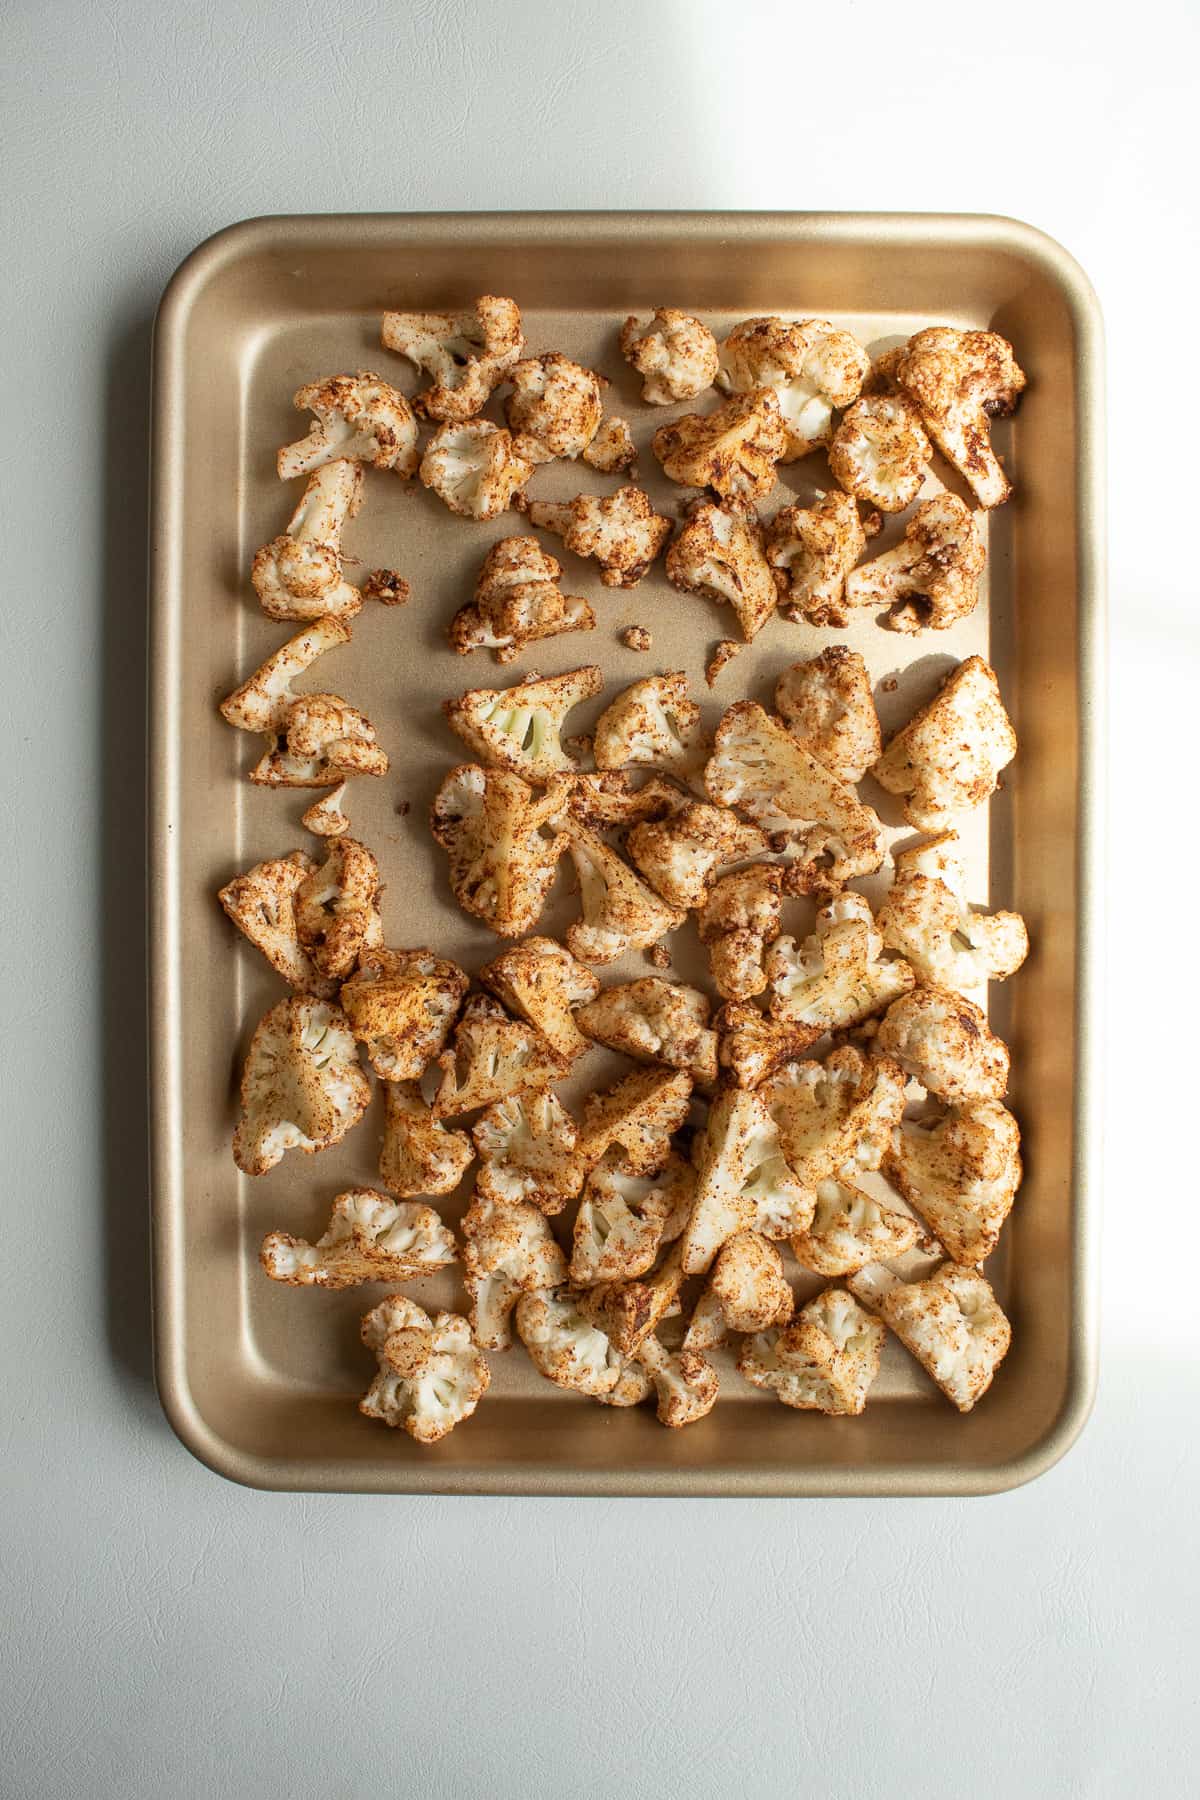 The seasoned cauliflower florets spread out over a small sheet pan.